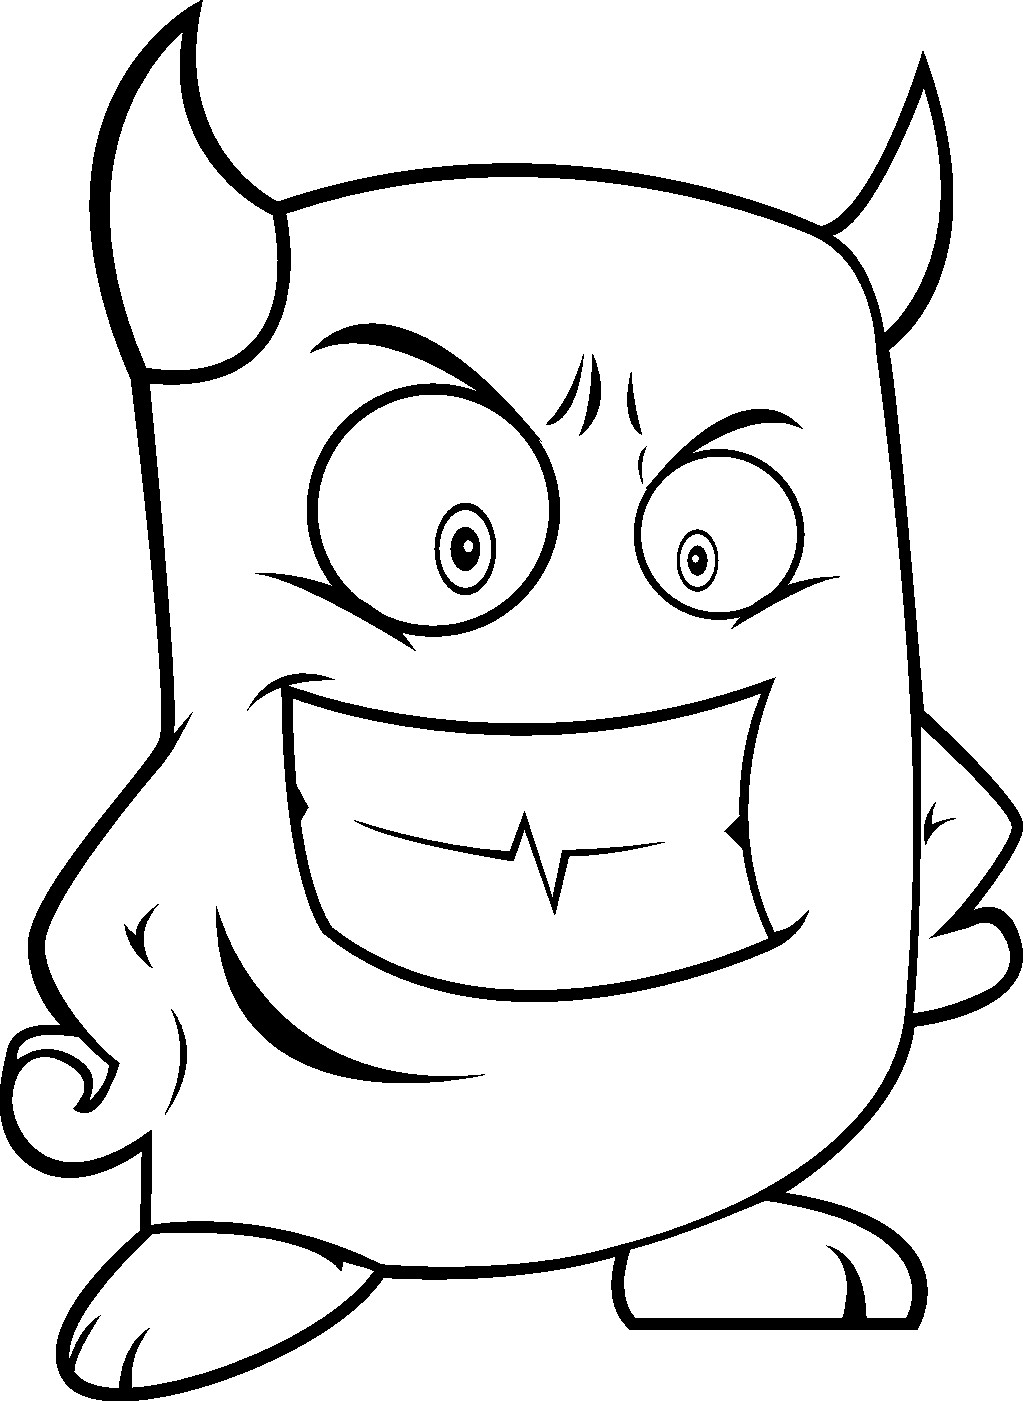 Monster Coloring Pages For Kids
 Monster Drawing For Kids at GetDrawings